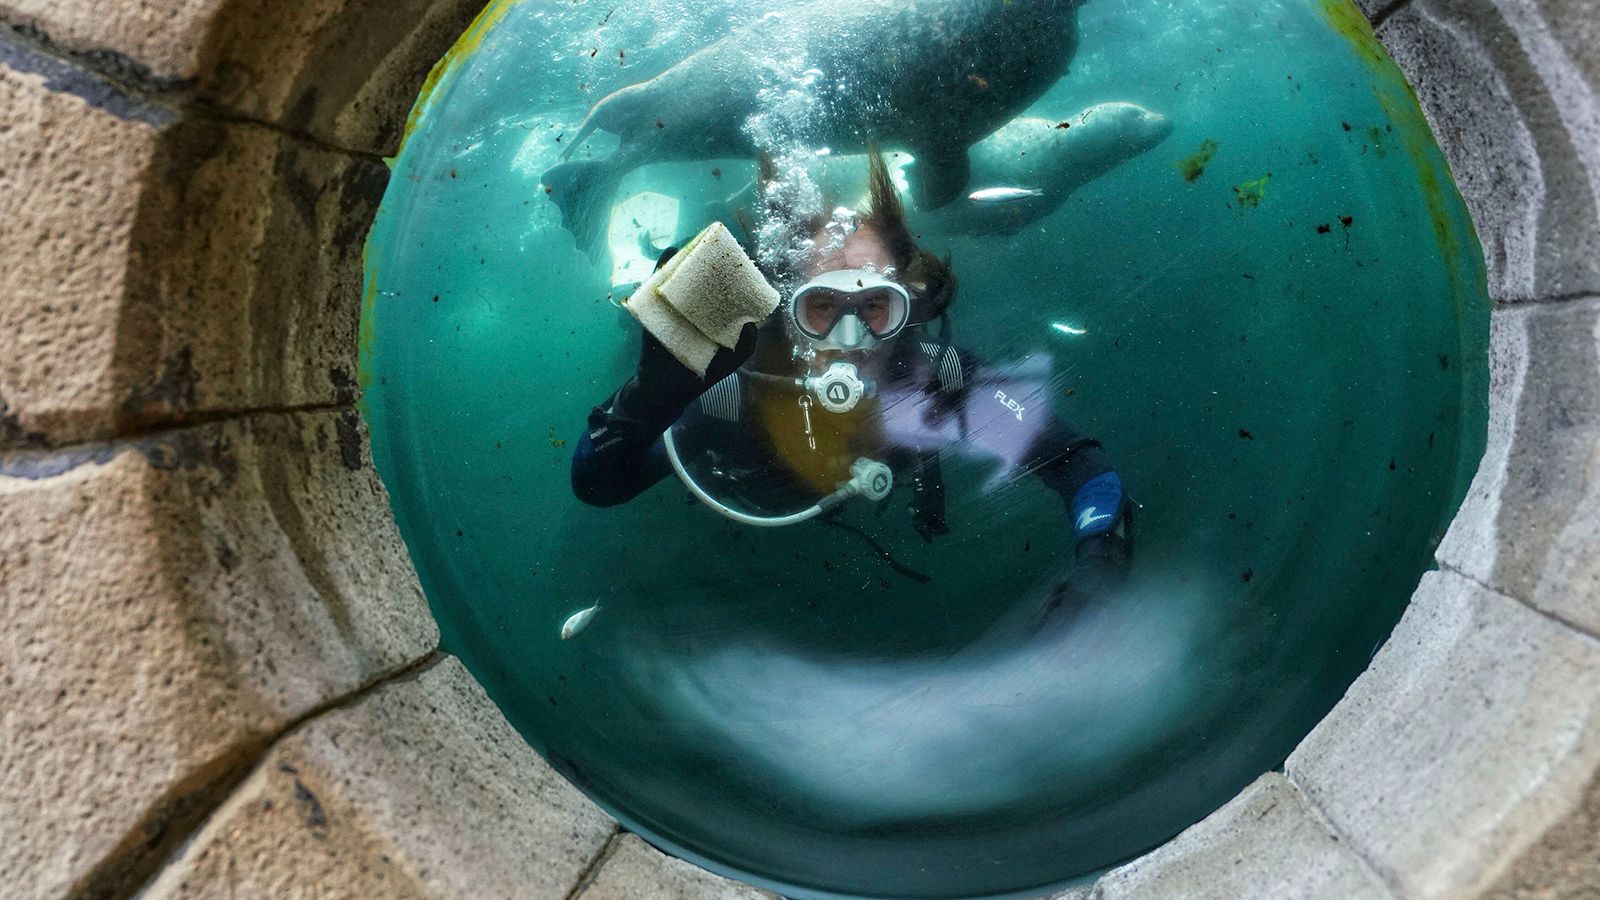 A diver cleans the inside window of the seal tank at the Tynemouth Aquarium in northeast England on July 2. The aquarium was getting set to reopen.